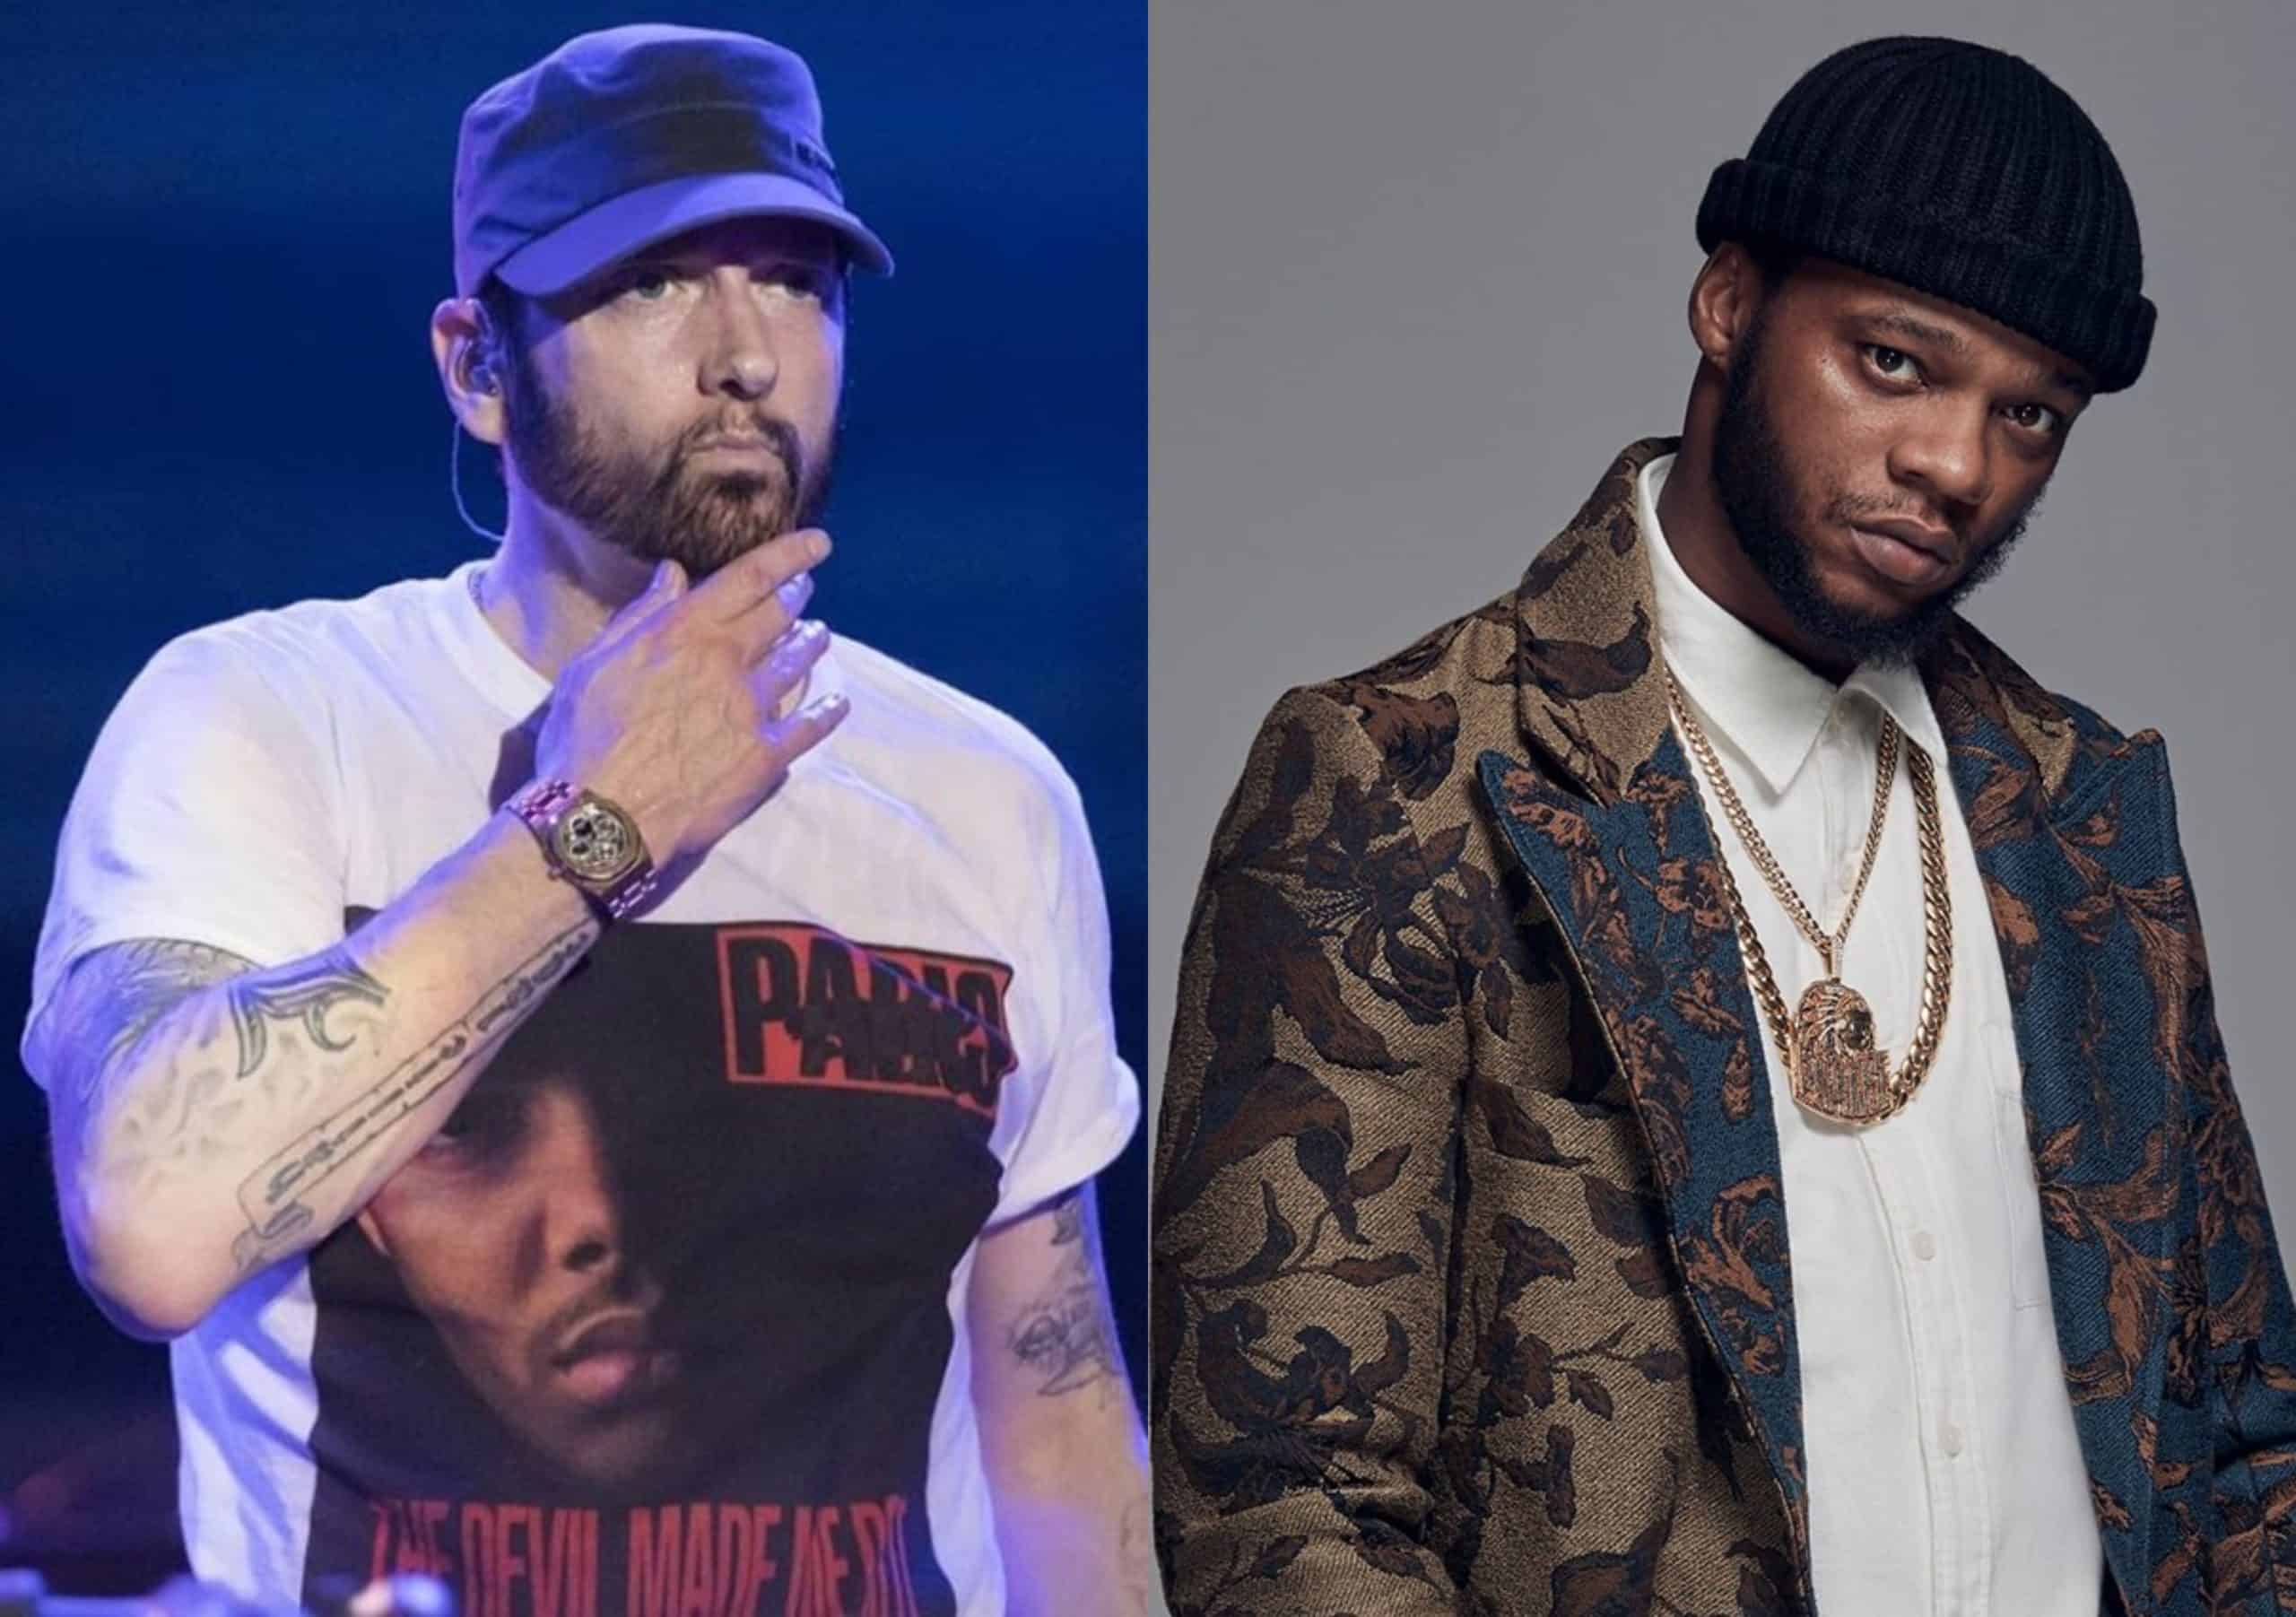 Papoose Says He Would Love To Work With Eminem That Would Be An Honour